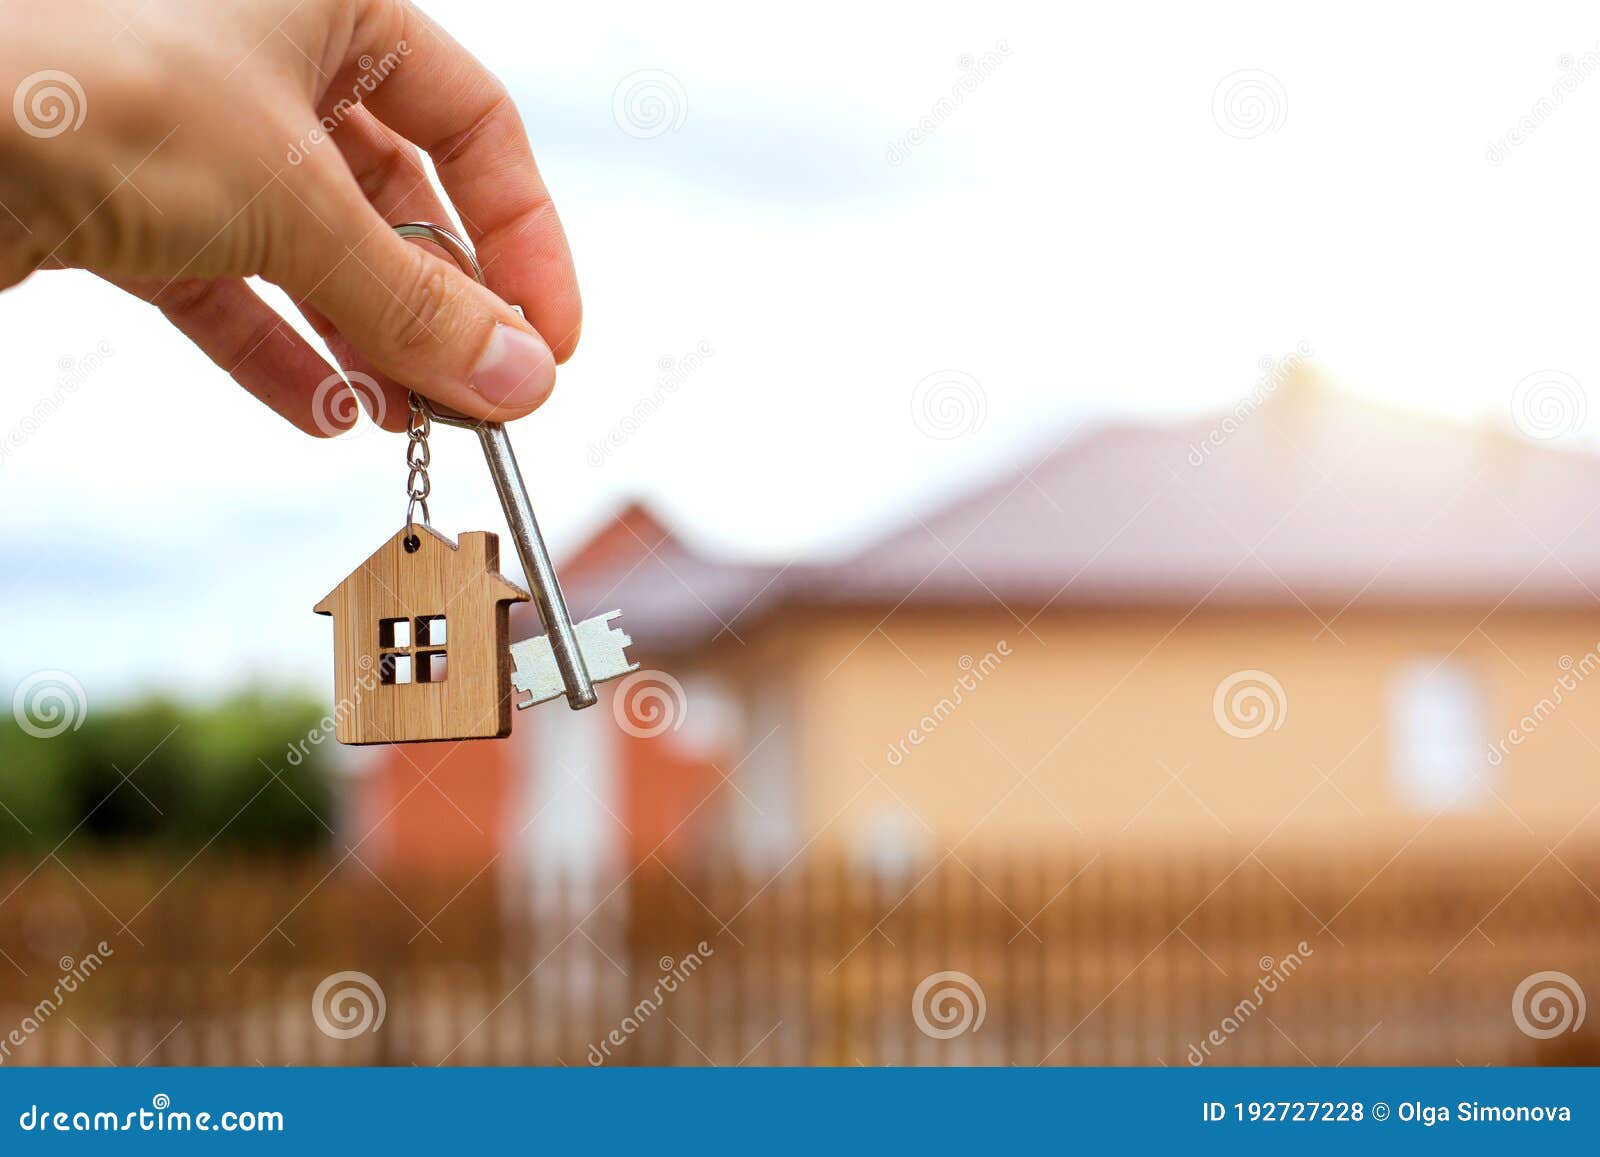 wooden pendant of a house and key. background of fence and cottage. dream of home, building, , delivery of the project, movi